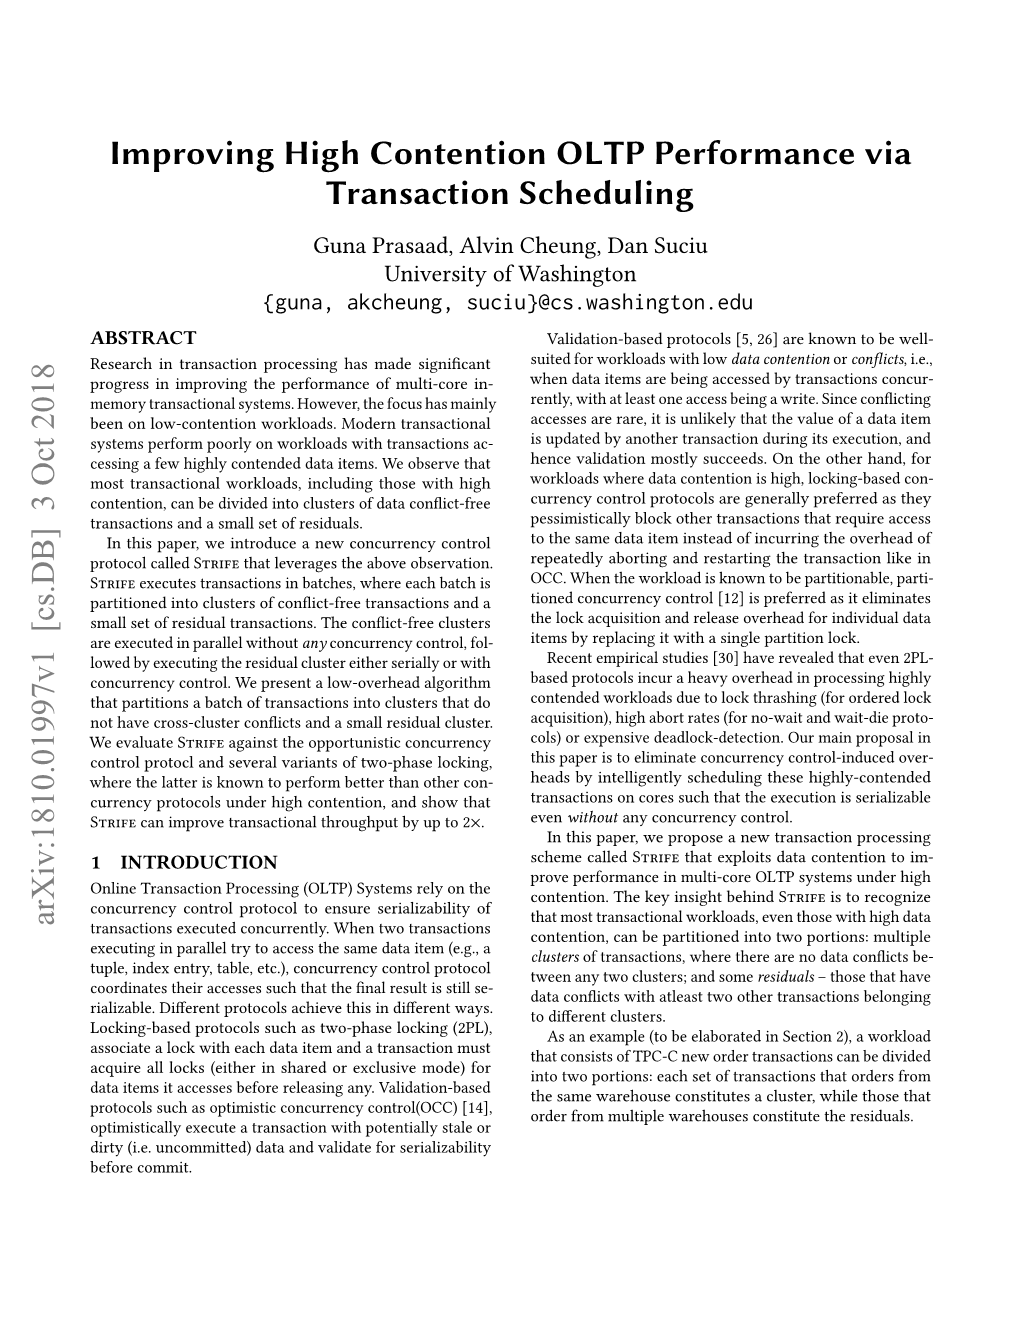 Improving High Contention OLTP Performance Via Transaction